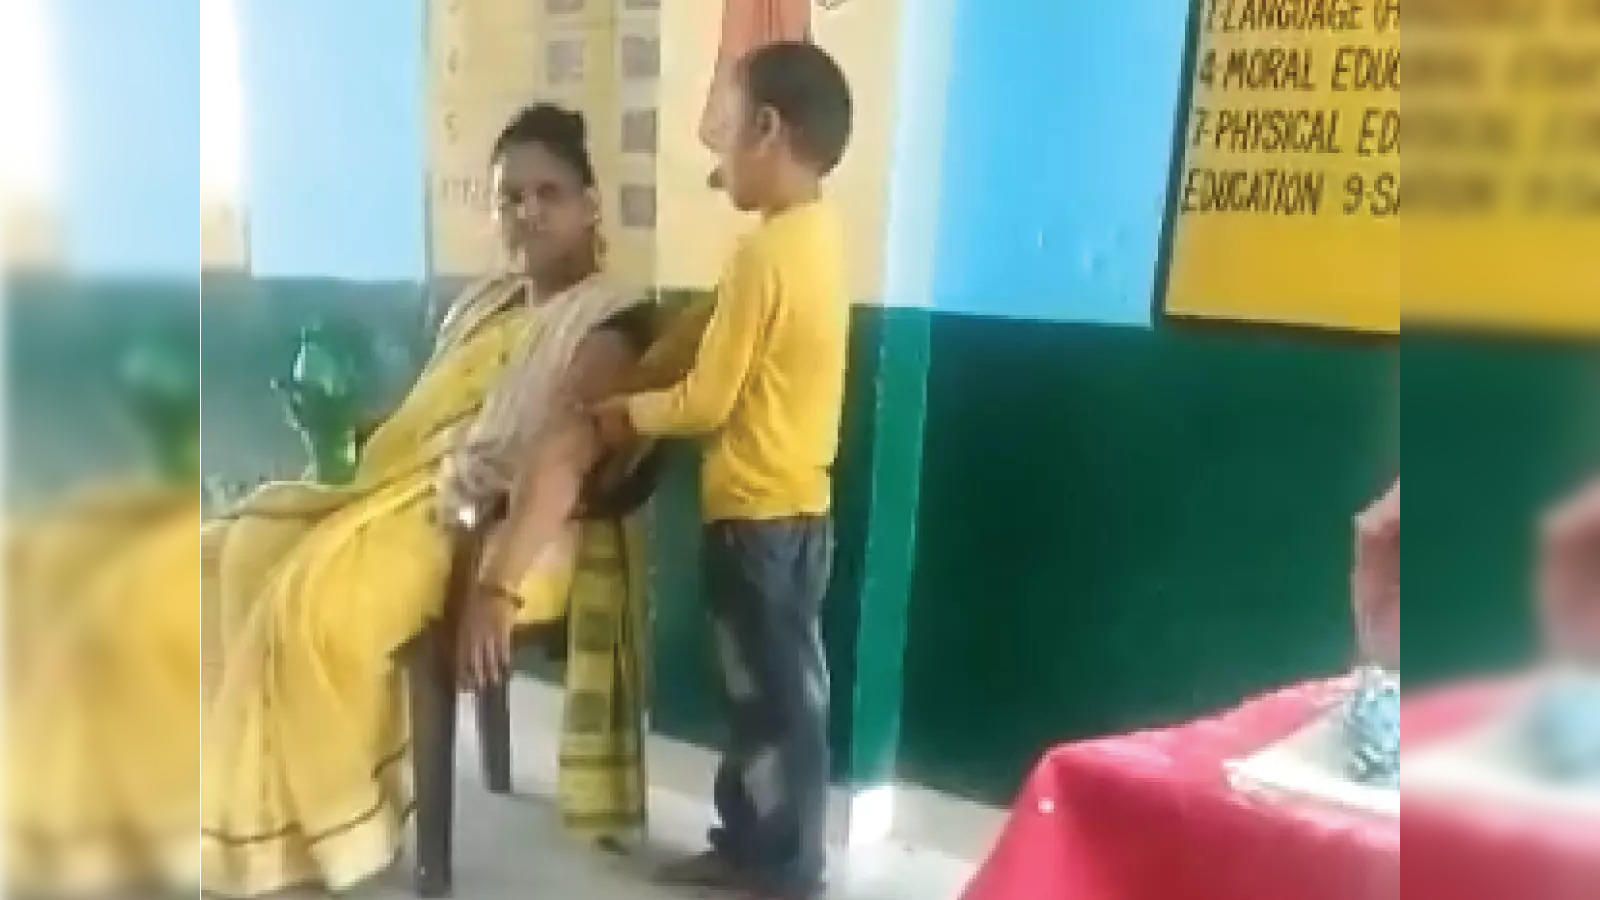 1600px x 900px - Teacher Massage: Teacher gets student to massage her arm, is suspended:  Viral video - The Economic Times